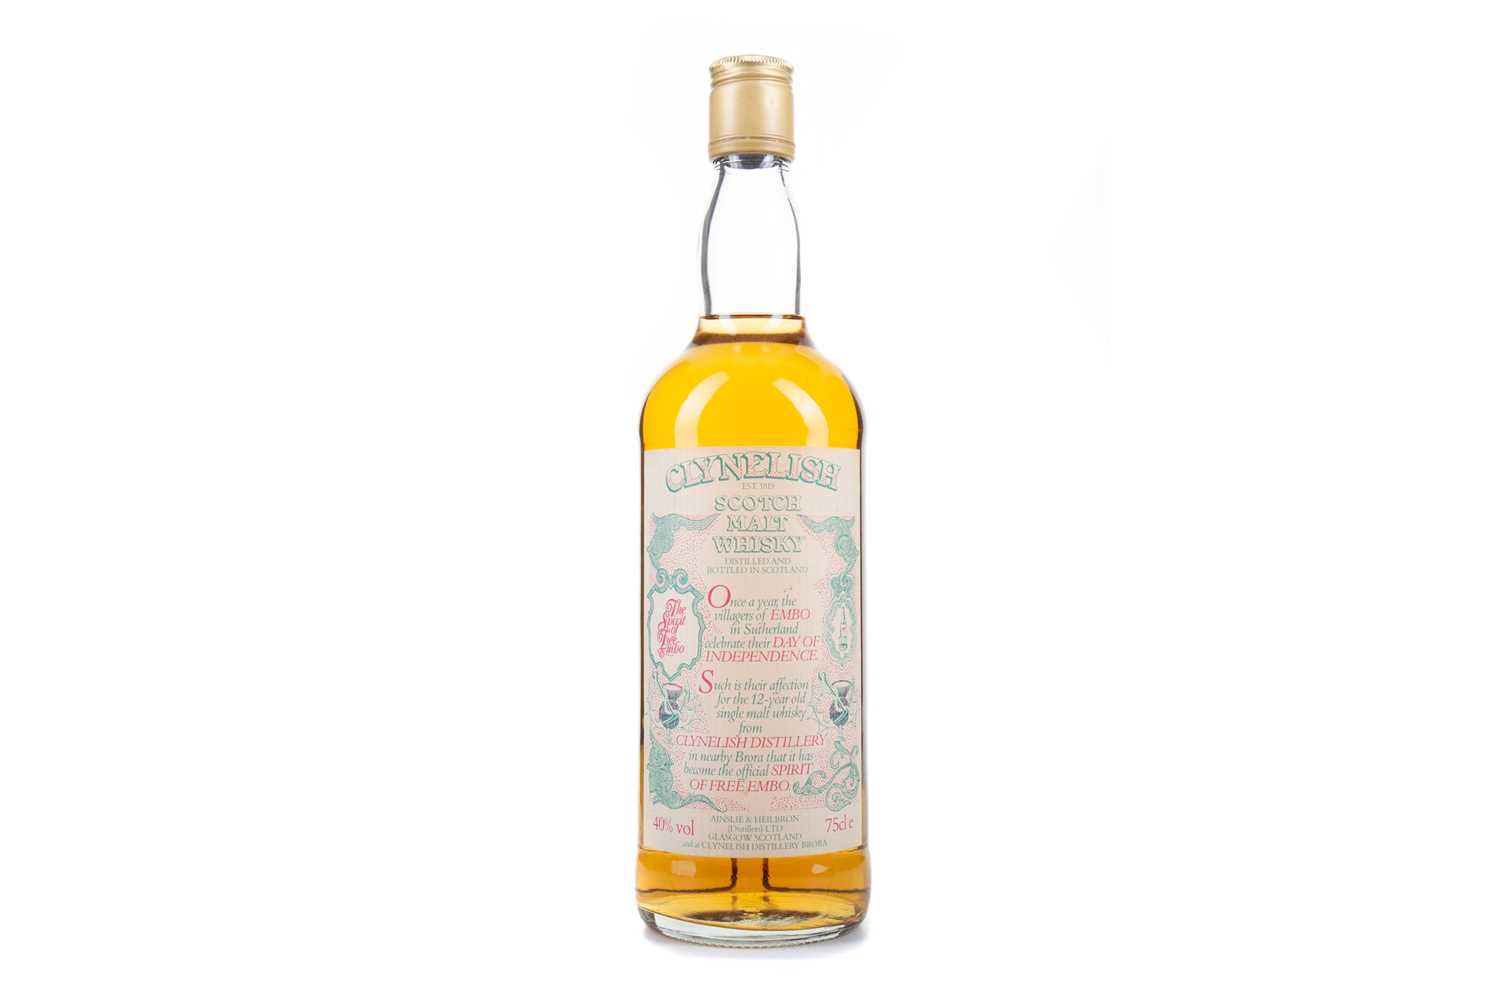 Lot 286 - CLYNELISH 12 YEAR OLD SPIRIT OF FREE EMBO 75CL